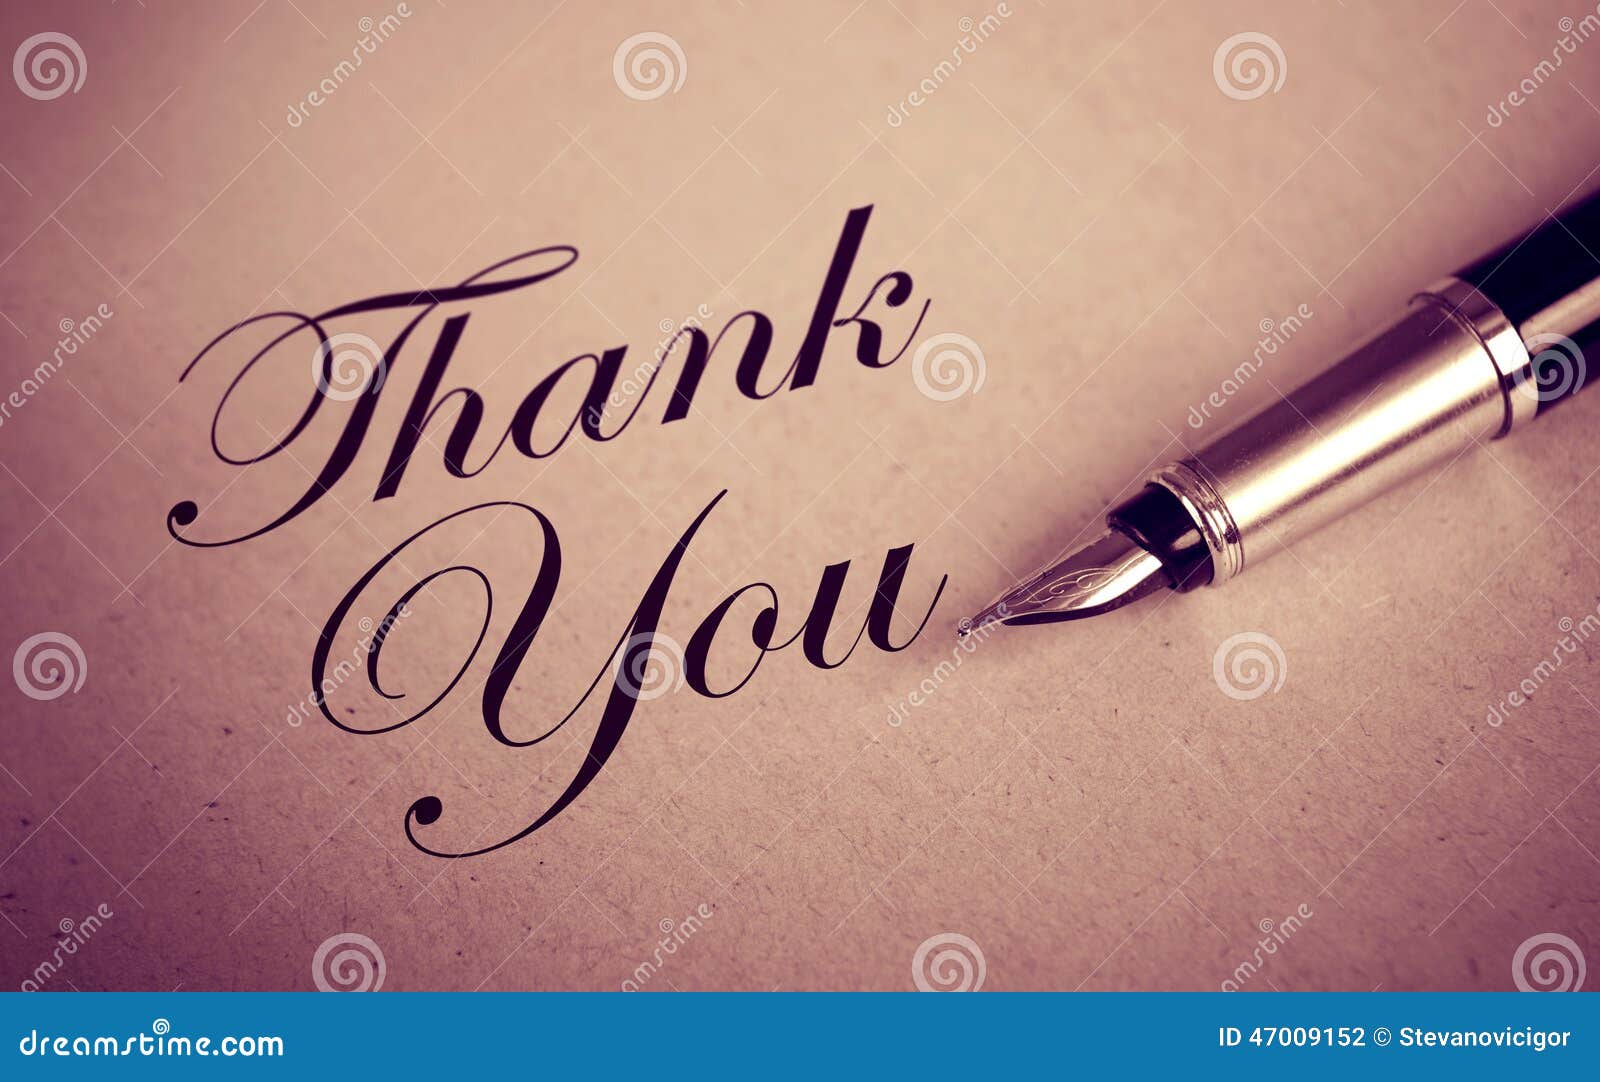 964 Pen Thank You Photos - Free & Royalty-Free Stock Photos from Dreamstime